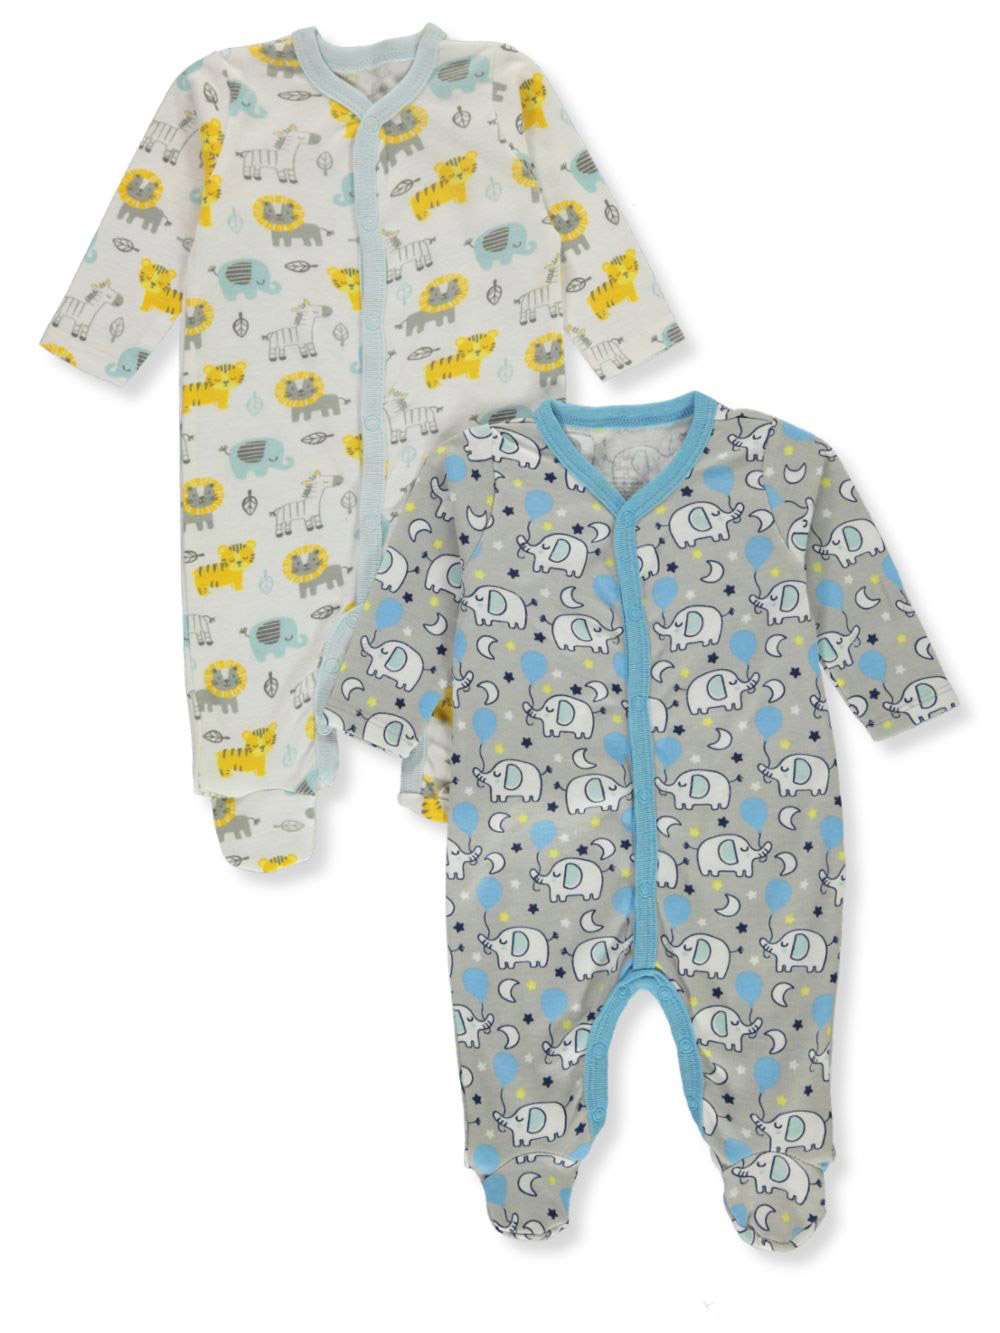 Baby Elements Coveralls